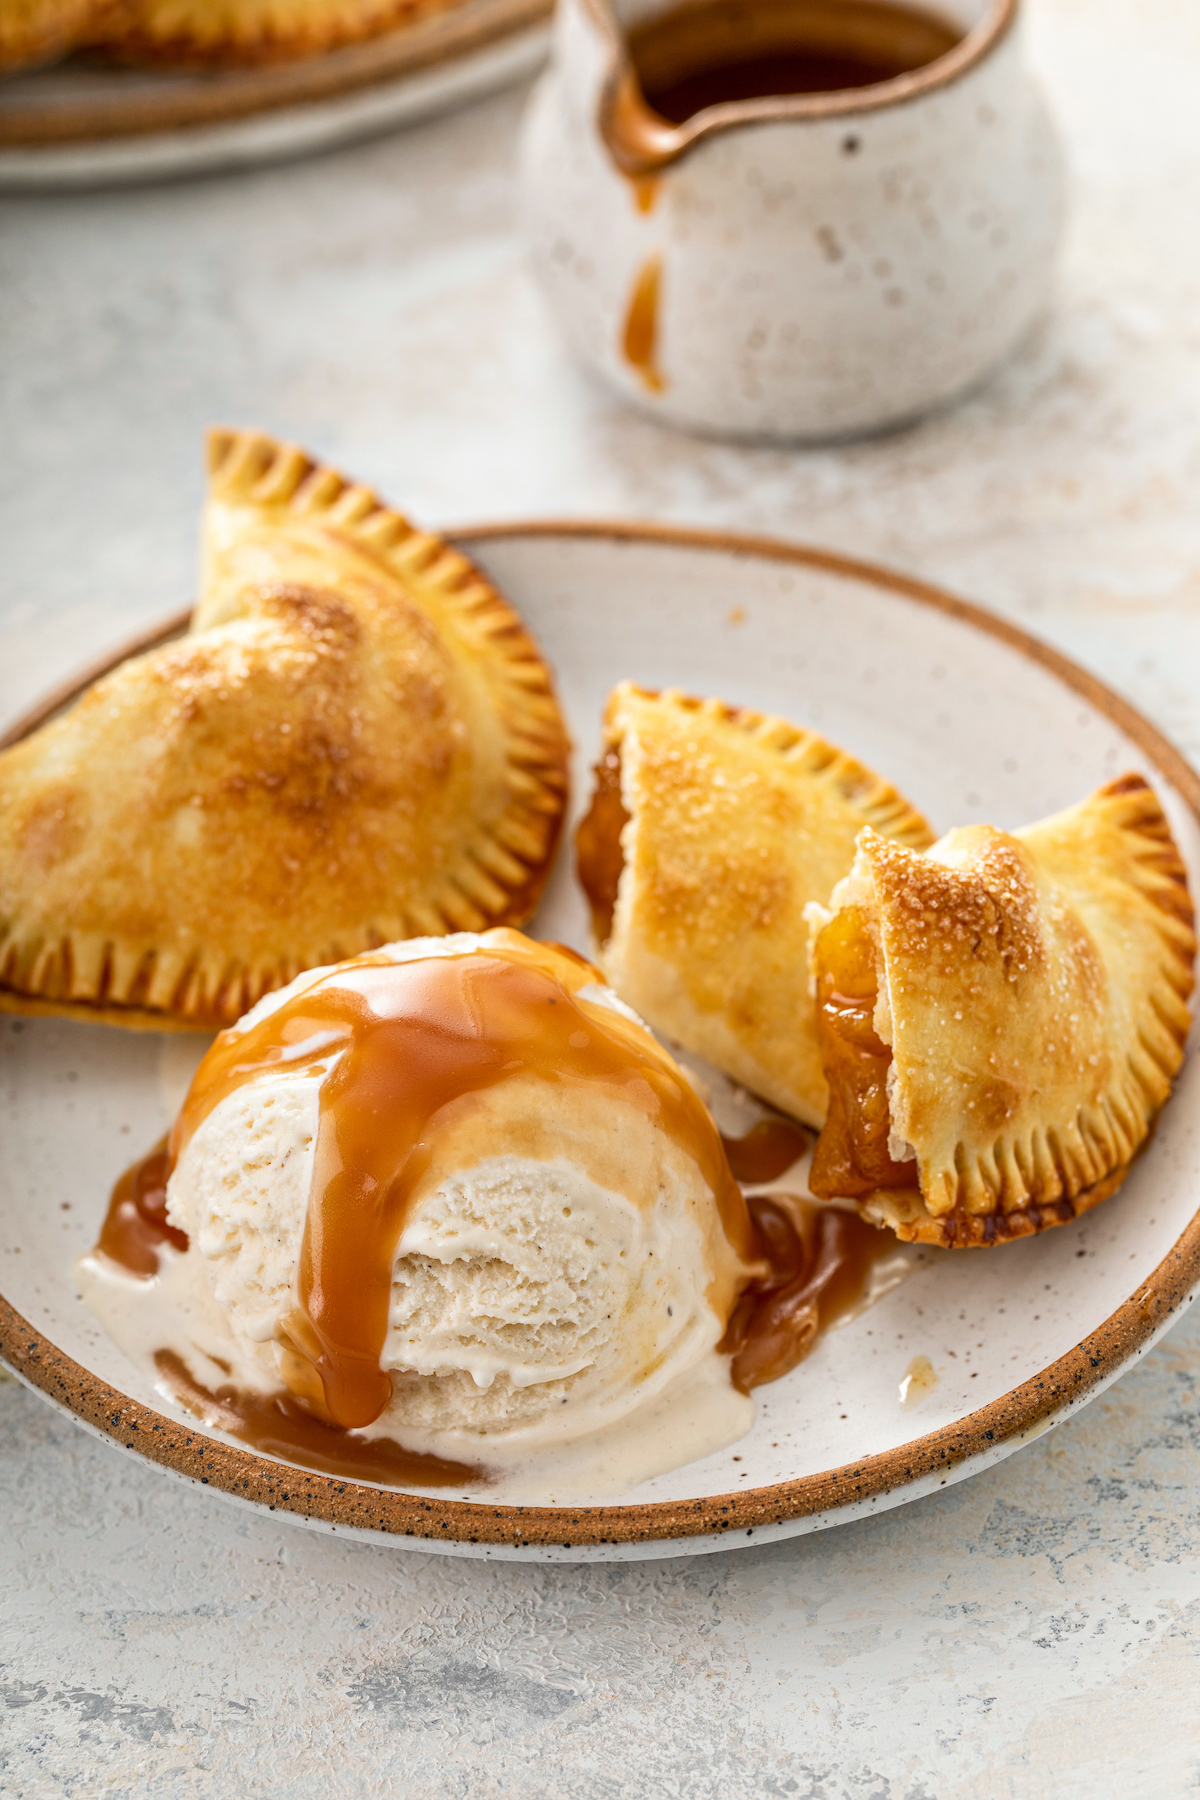 Pineapple empanadas cut in half in a bowl with ice cream and caramel sauce.